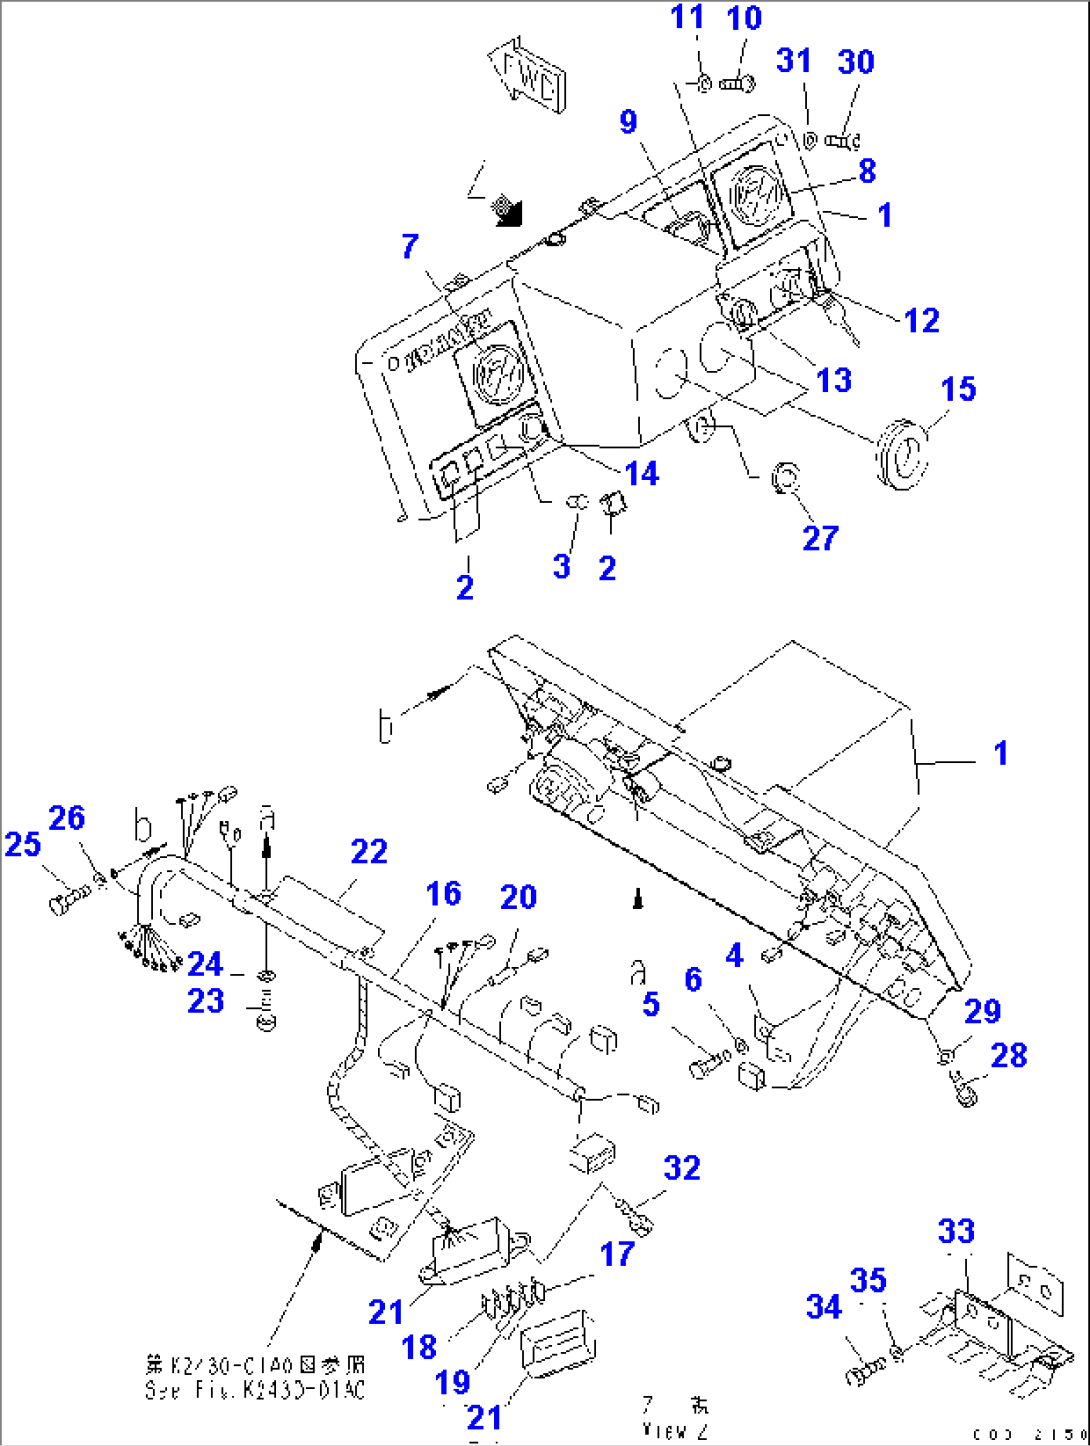 PANEL (FOR 2 LEVER STEERING)